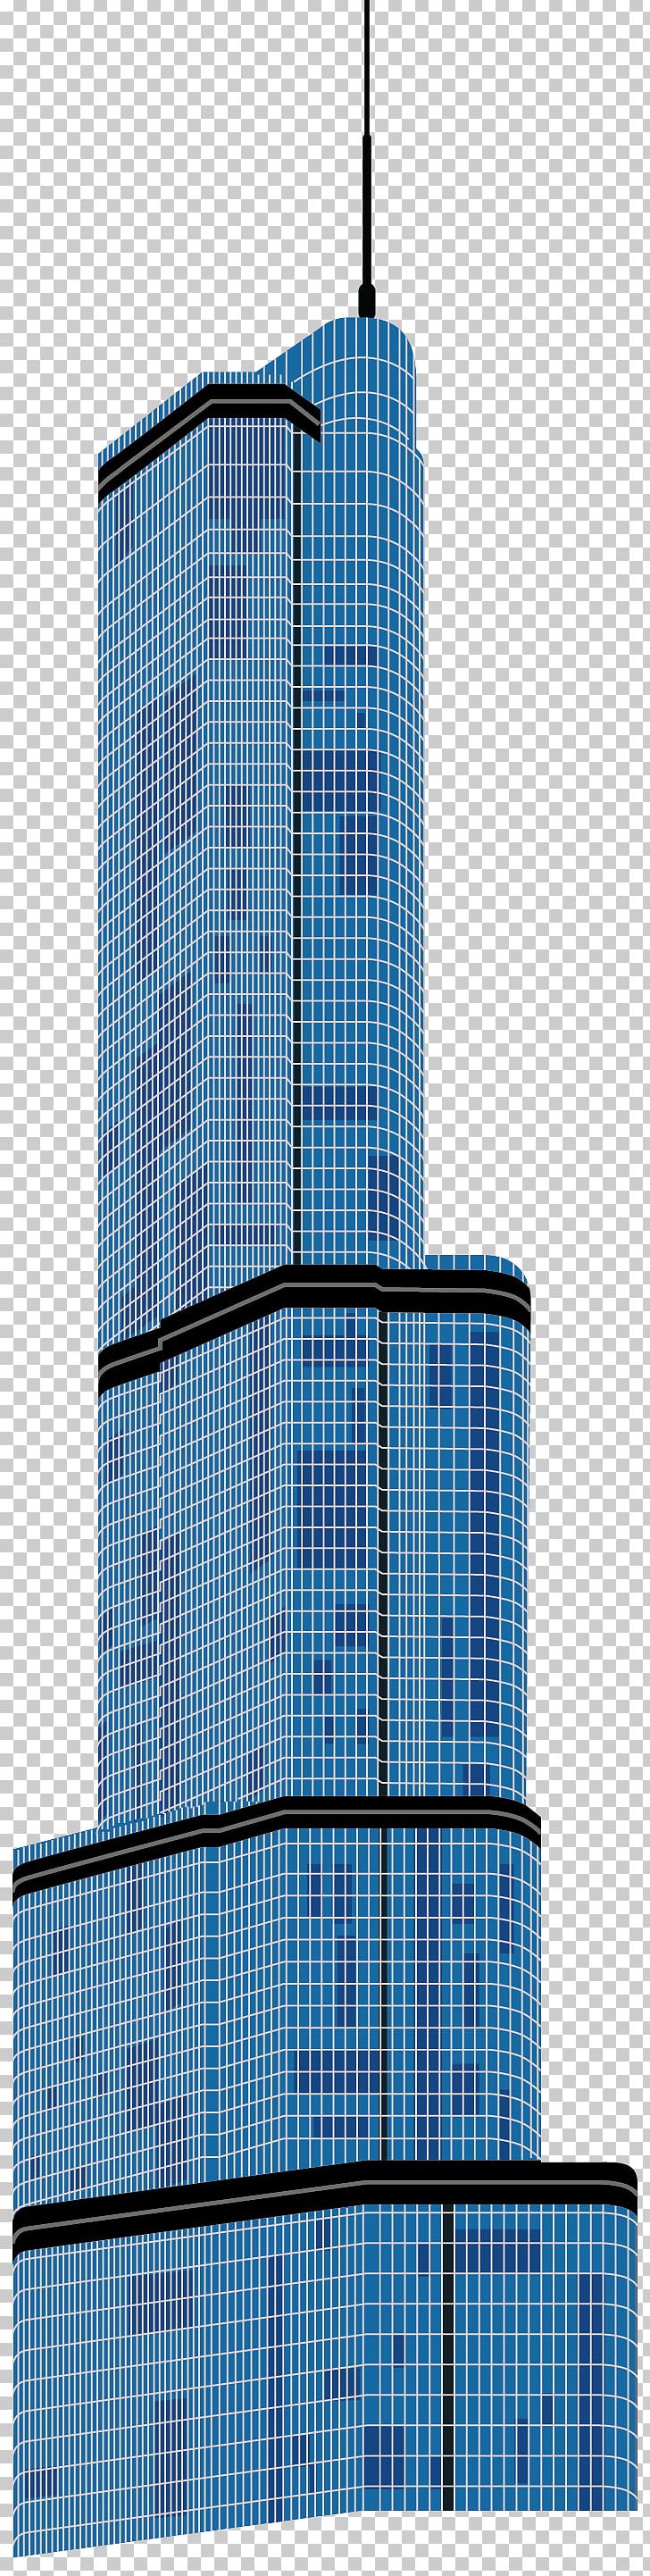 Commercial Building Facade Skyscraper Corporate Headquarters PNG, Clipart, Angle, Architect, Architecture, Building, Celebrities Free PNG Download